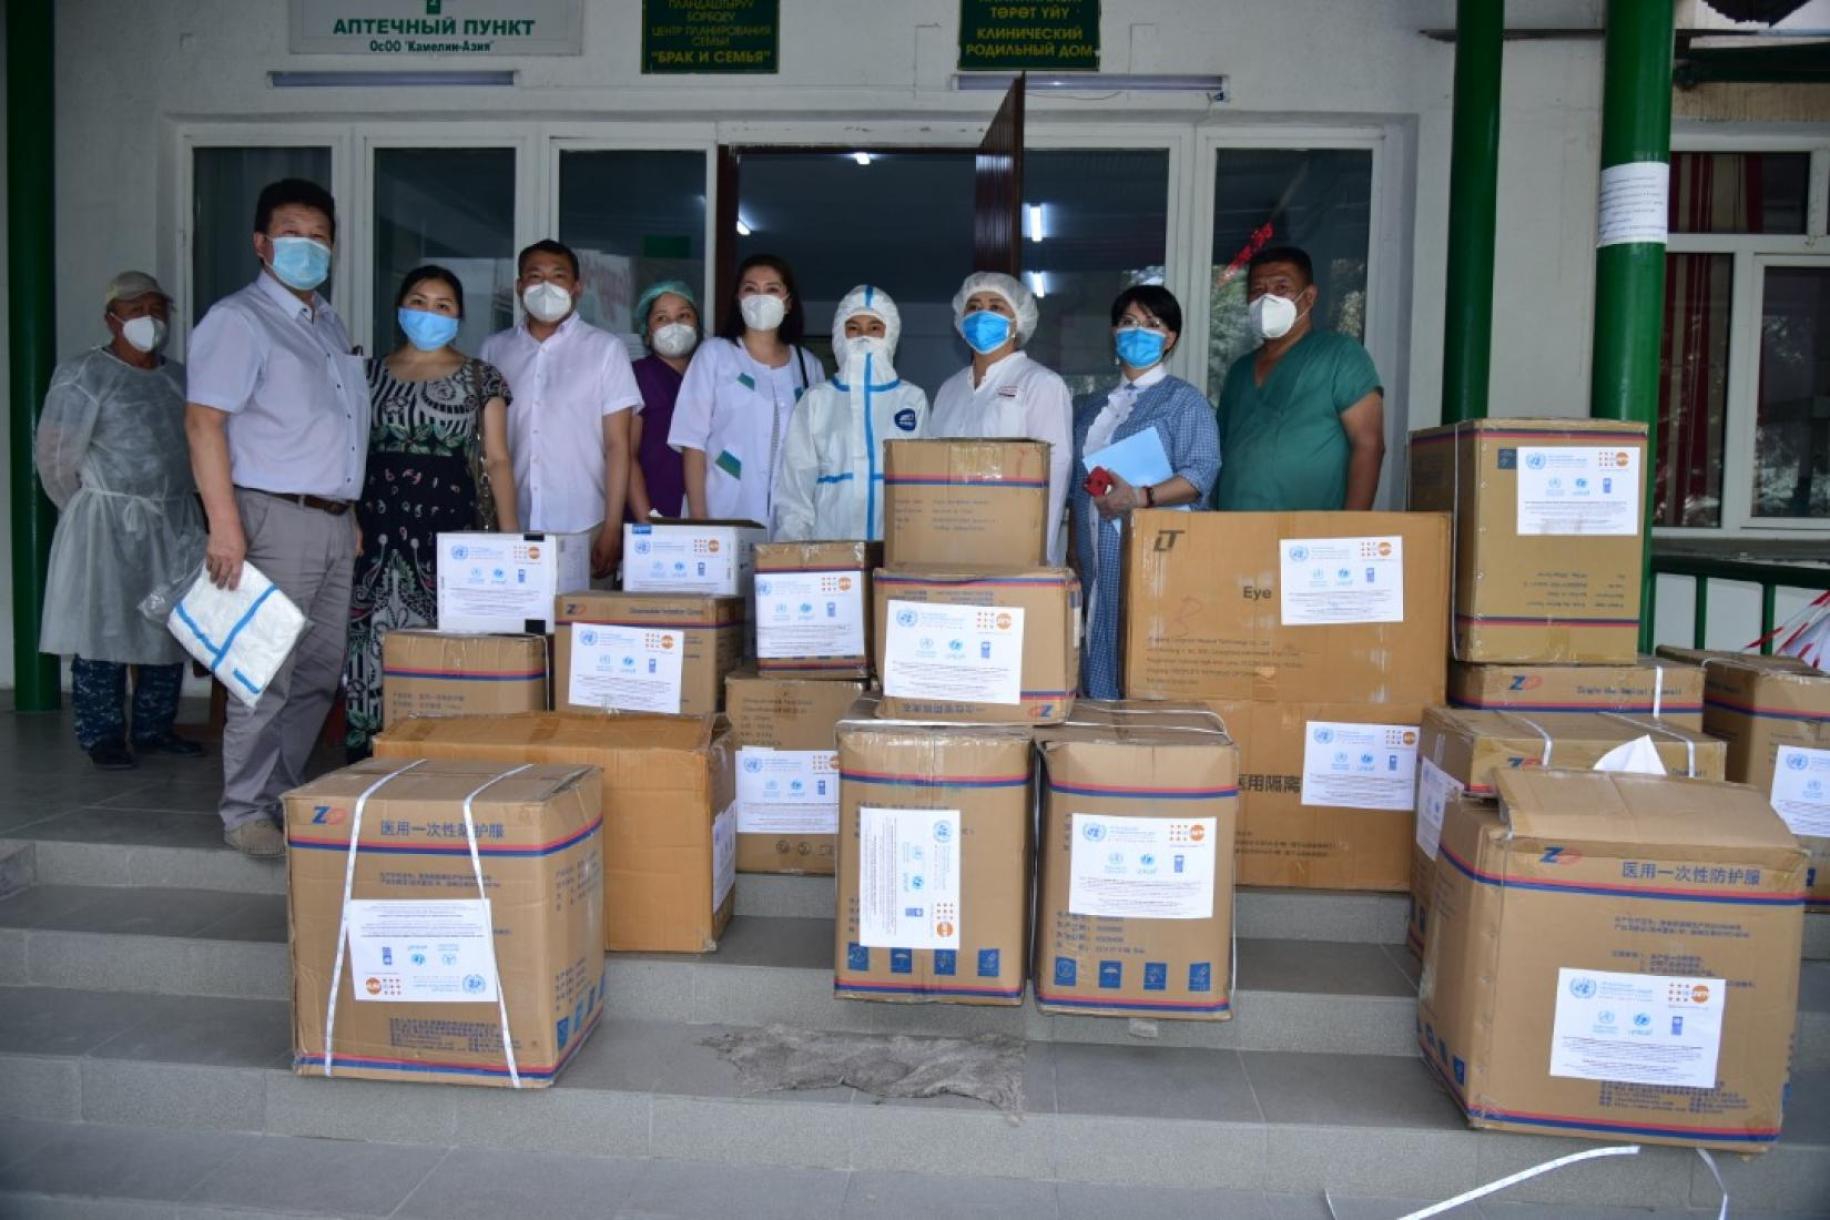 UN personnel and healthcare workers stand behind donation boxes wearing protective gear.